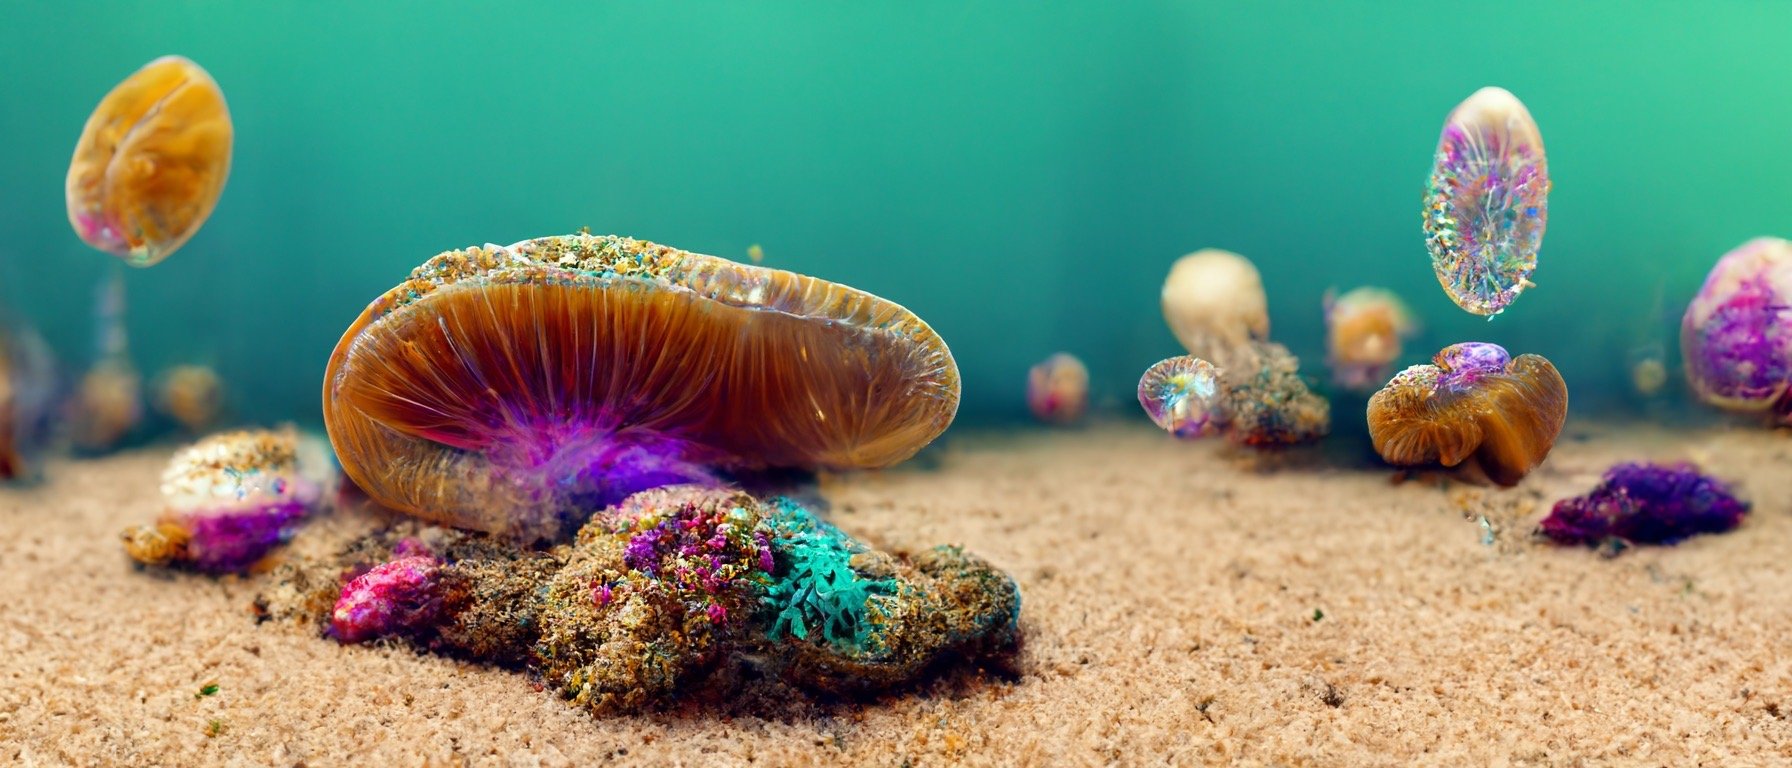 fe958d72-78ce-4e64-885a-1f13e9ccbd22_S3RAPH_httpss.mj.runcXGygH_majestic_wide_angle_under_see_scene_with_lots_of_crazy_jelly_fish_and_a_close_up.JPG